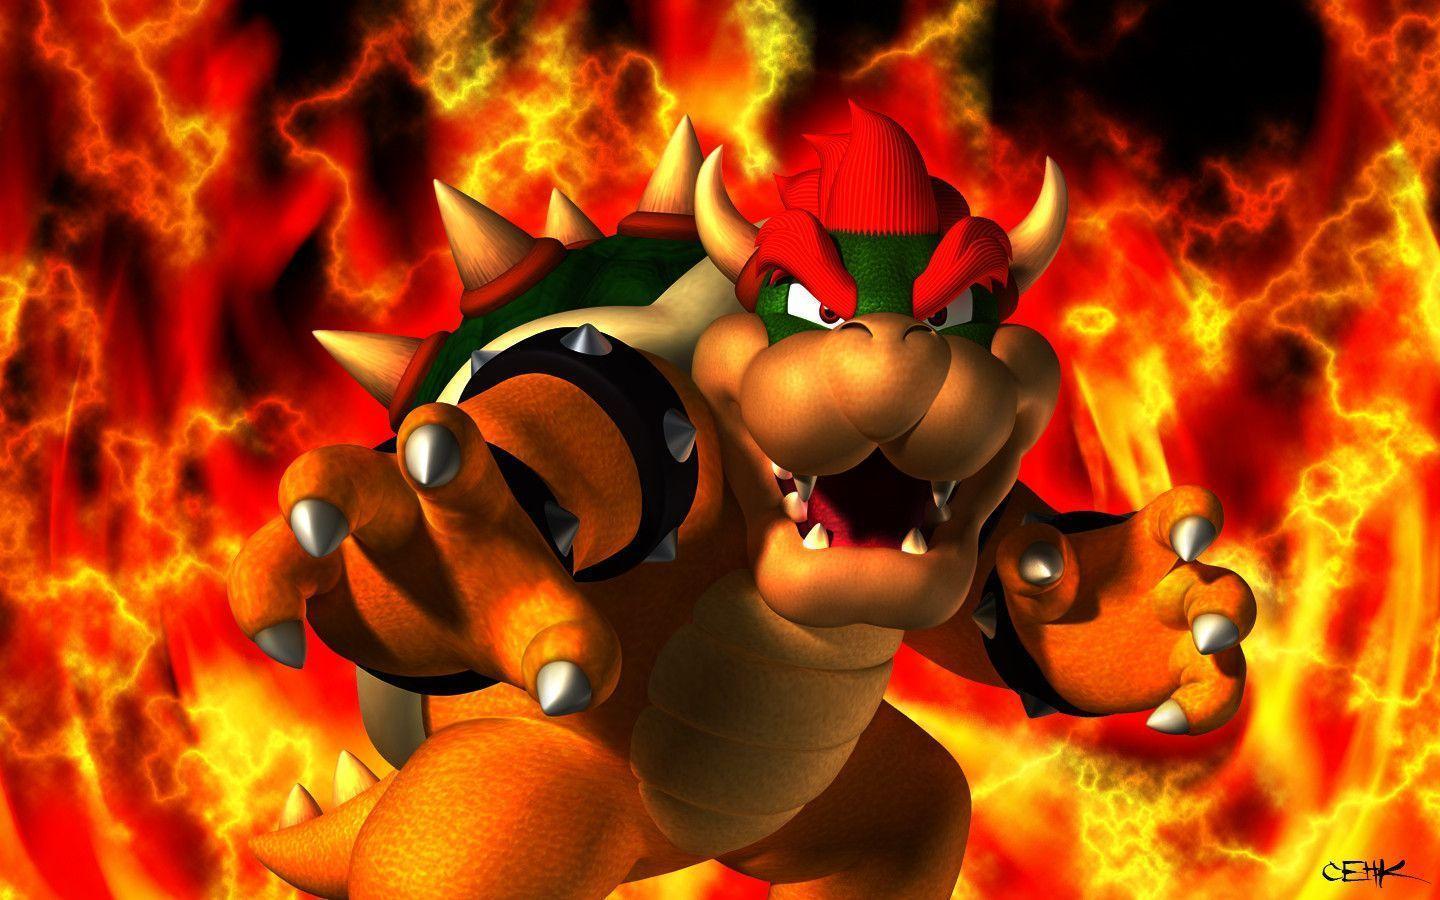 Bowser, the main antagonist of the Mario franchise - Bowser